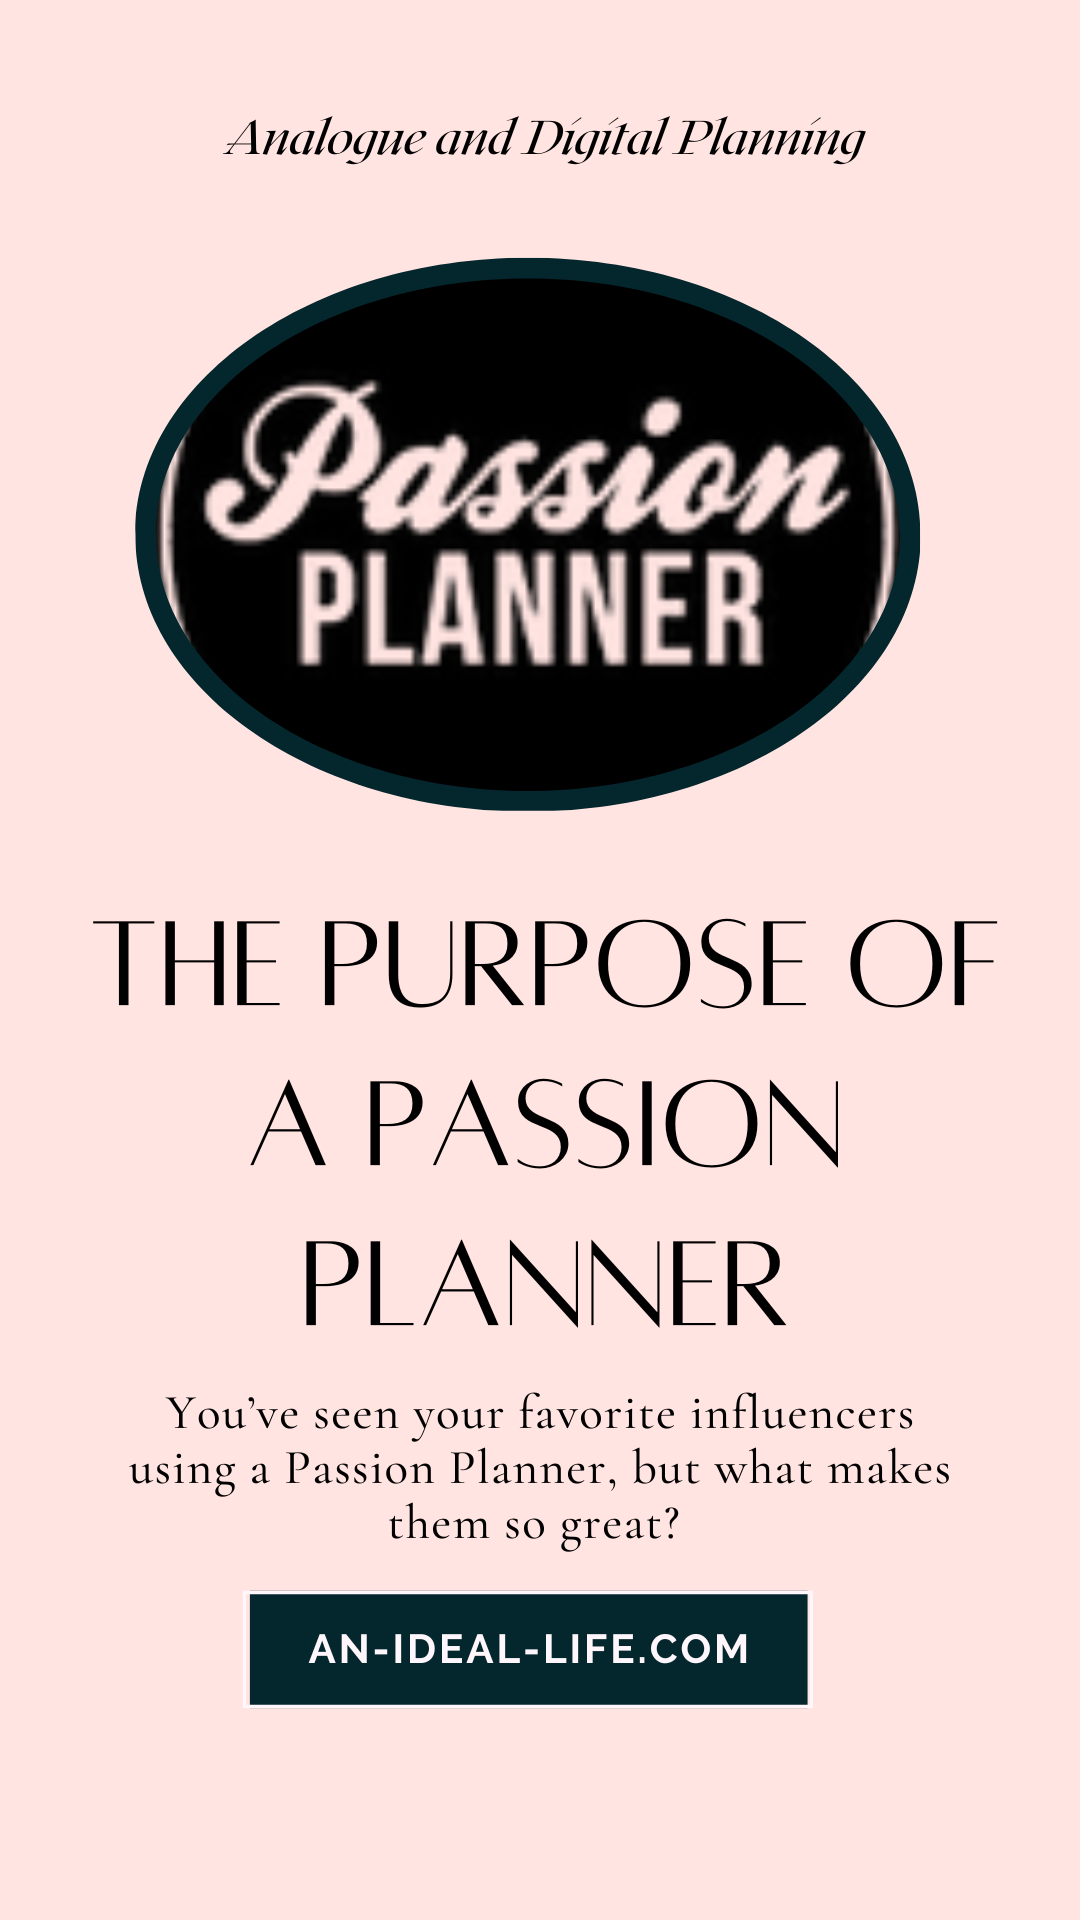 What Is the Purpose of a Passion Planner?